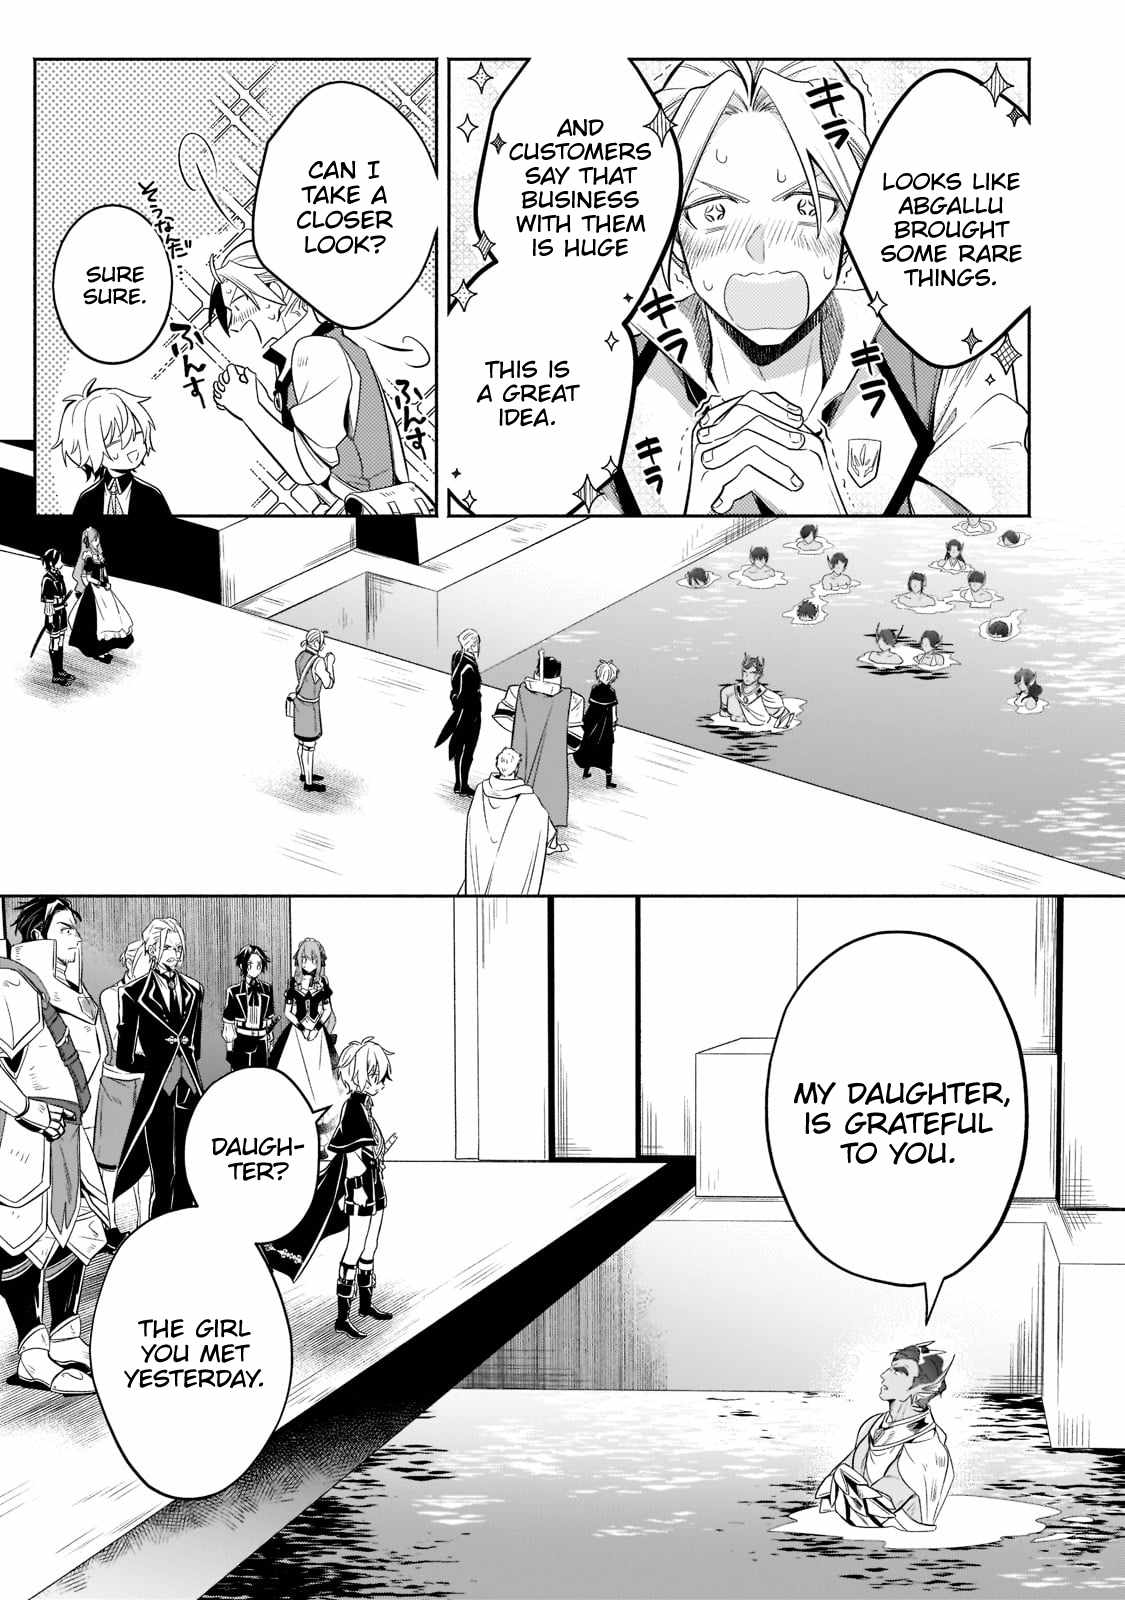 Fun Territory Defense by the Optimistic Lord Chapter 15-2-eng-li - Page 4